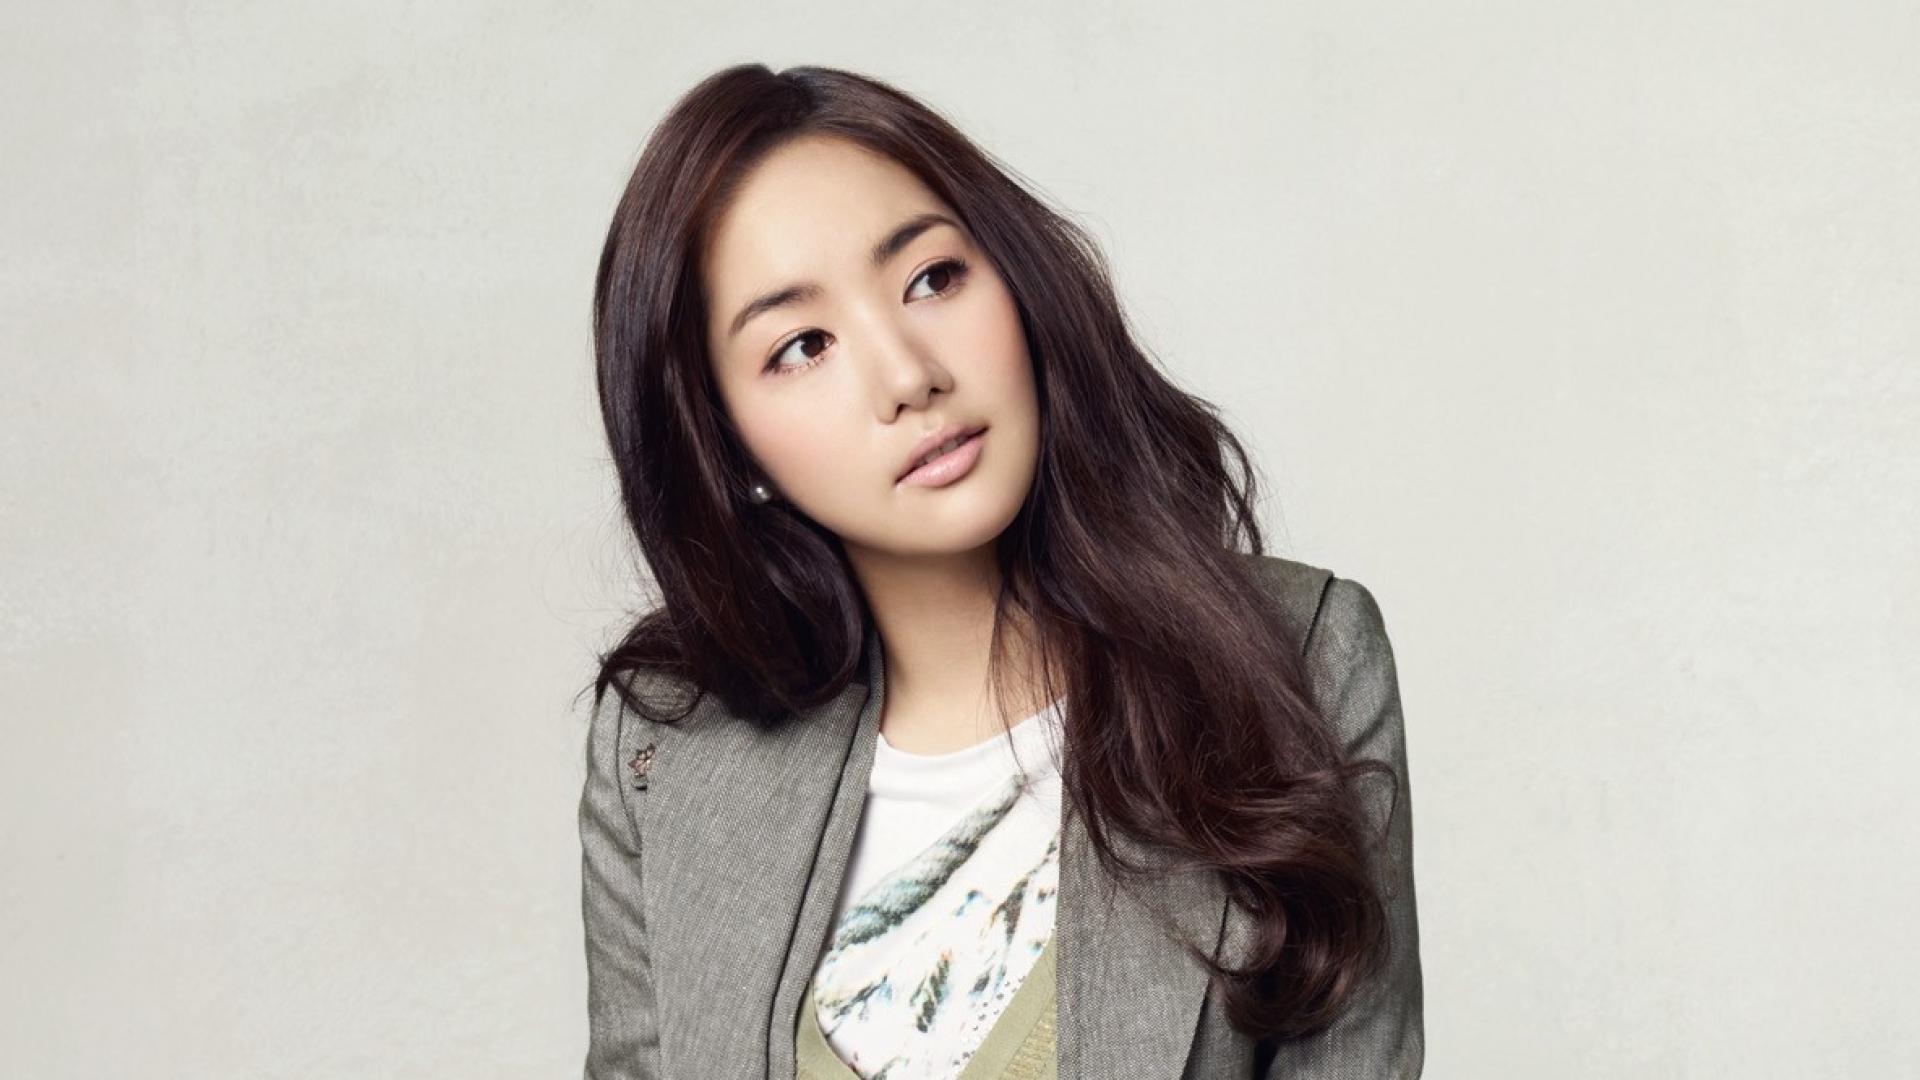 Park Min Young Wallpaper Image Photos Pictures Background